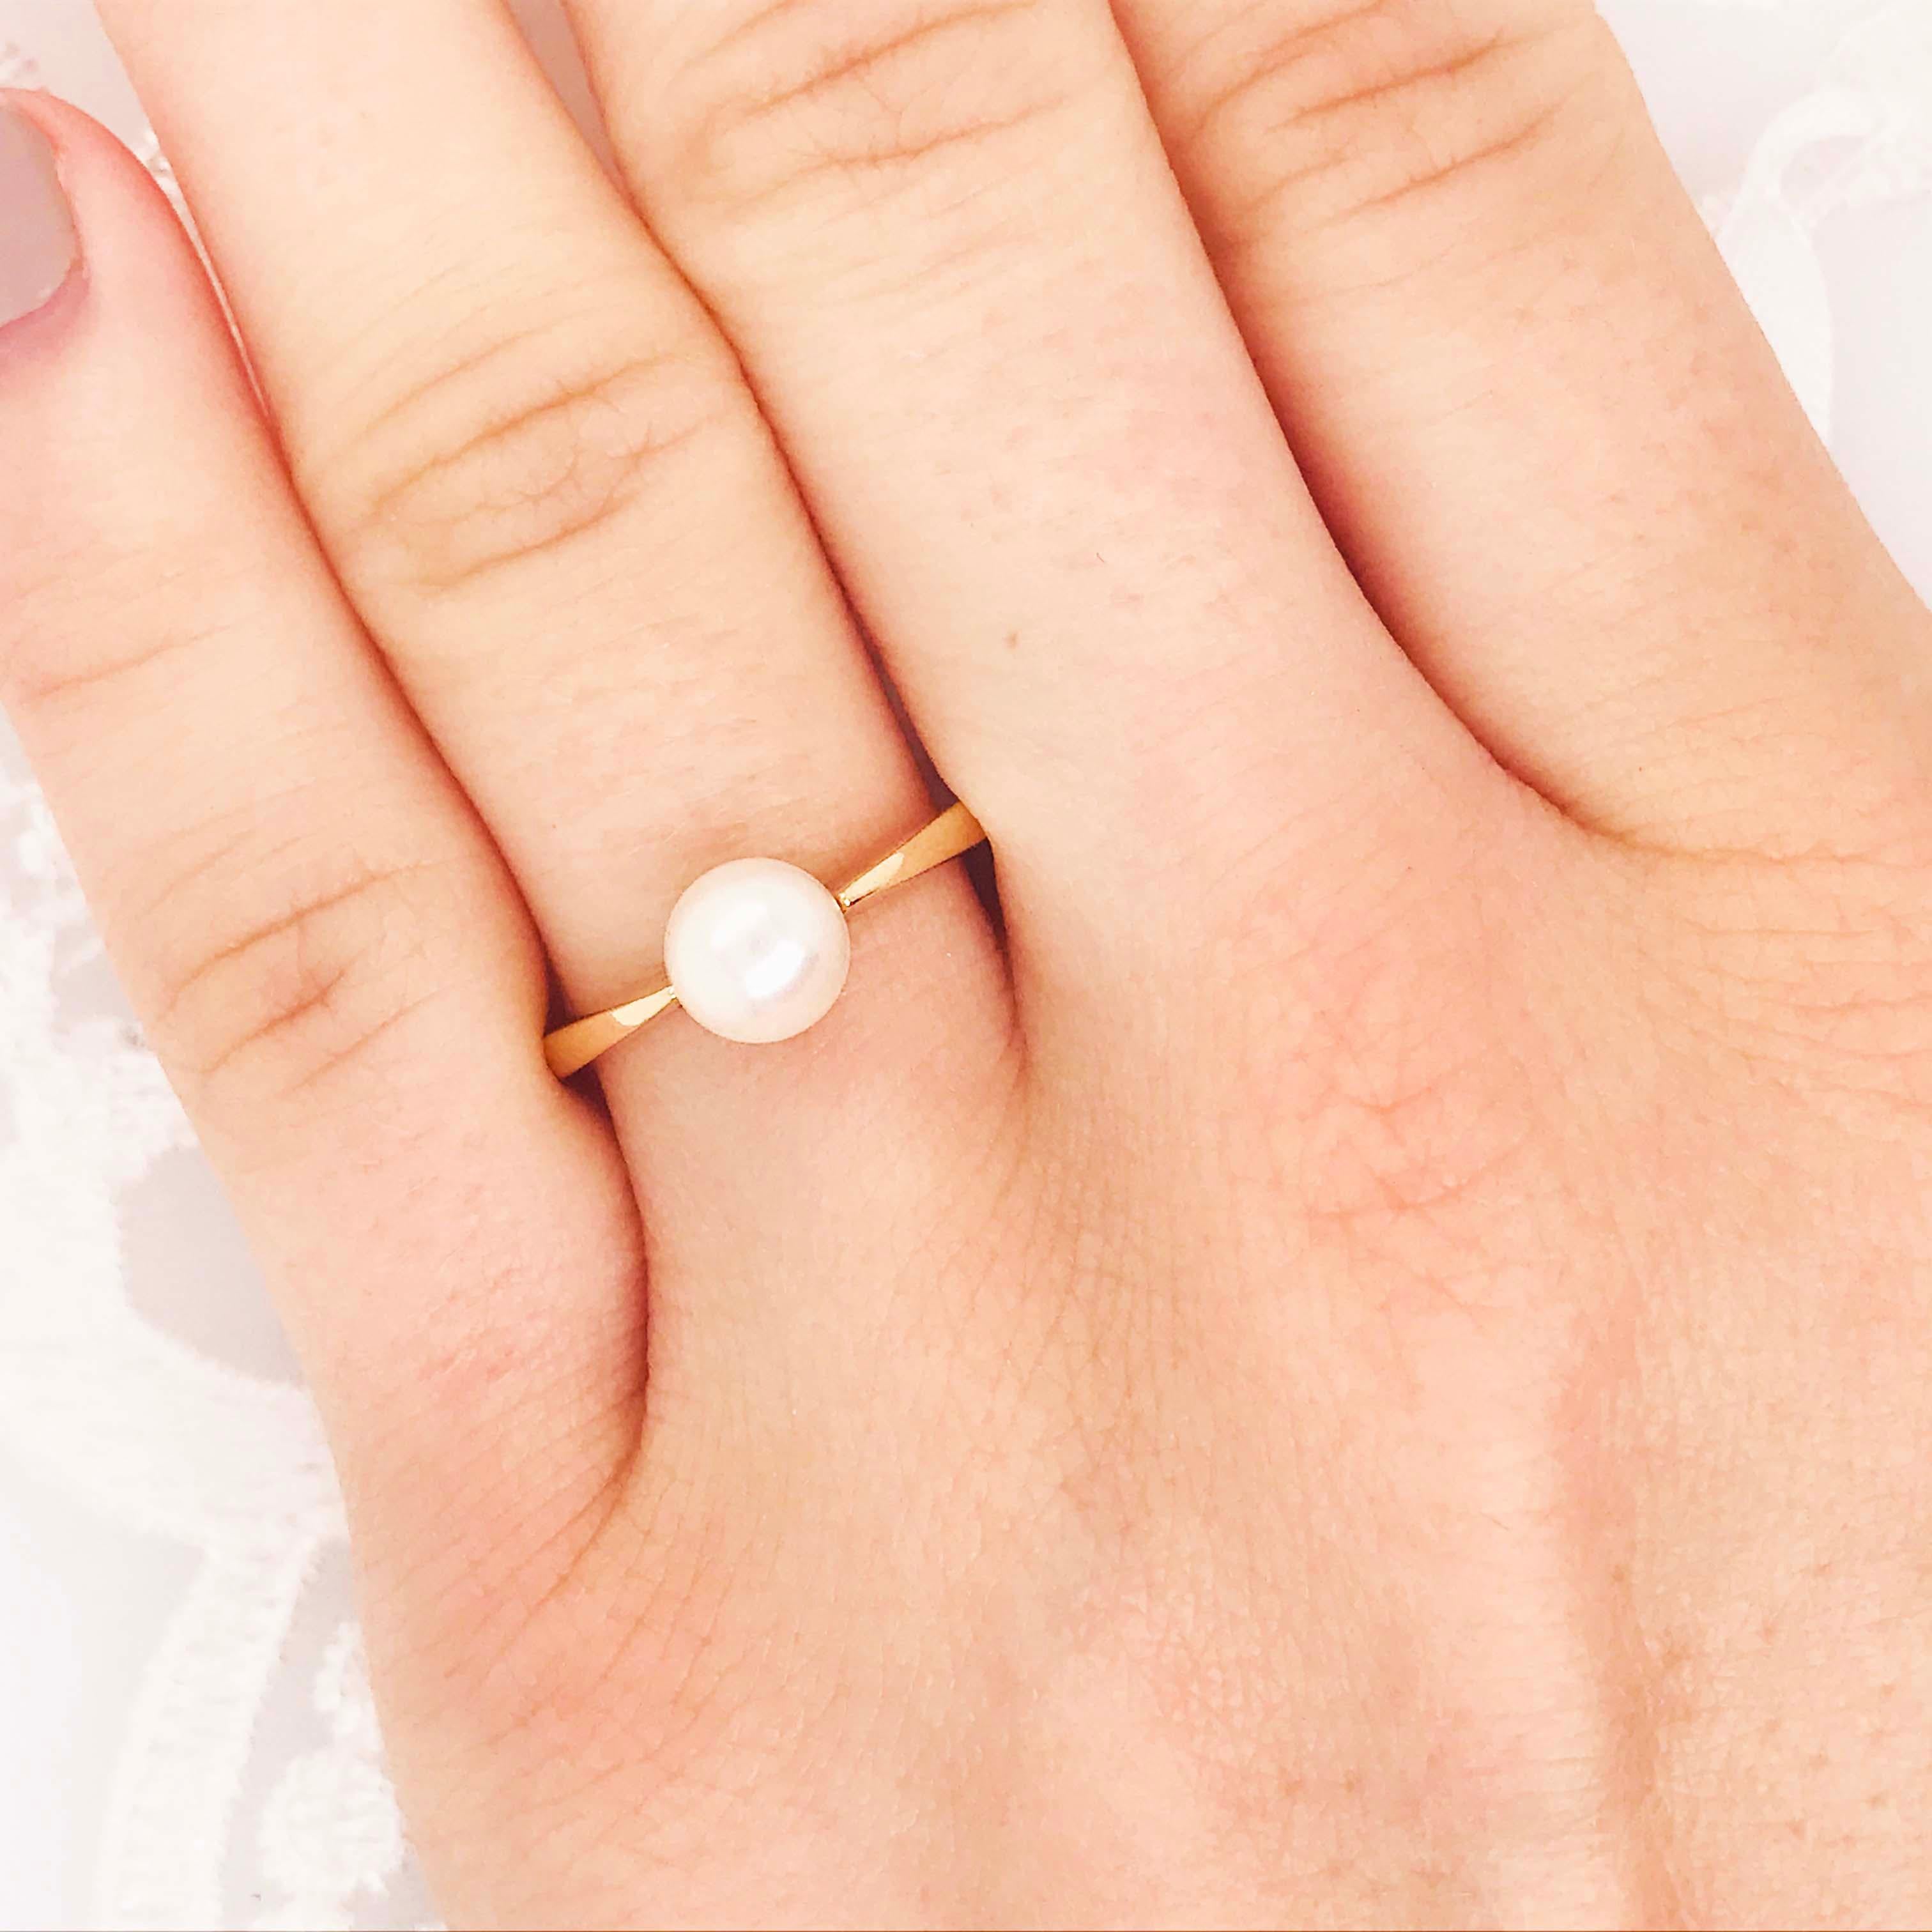 Modern Akoya Pearl Solitaire Ring with Genuine Round Akoya Pearl in 14 Karat Gold